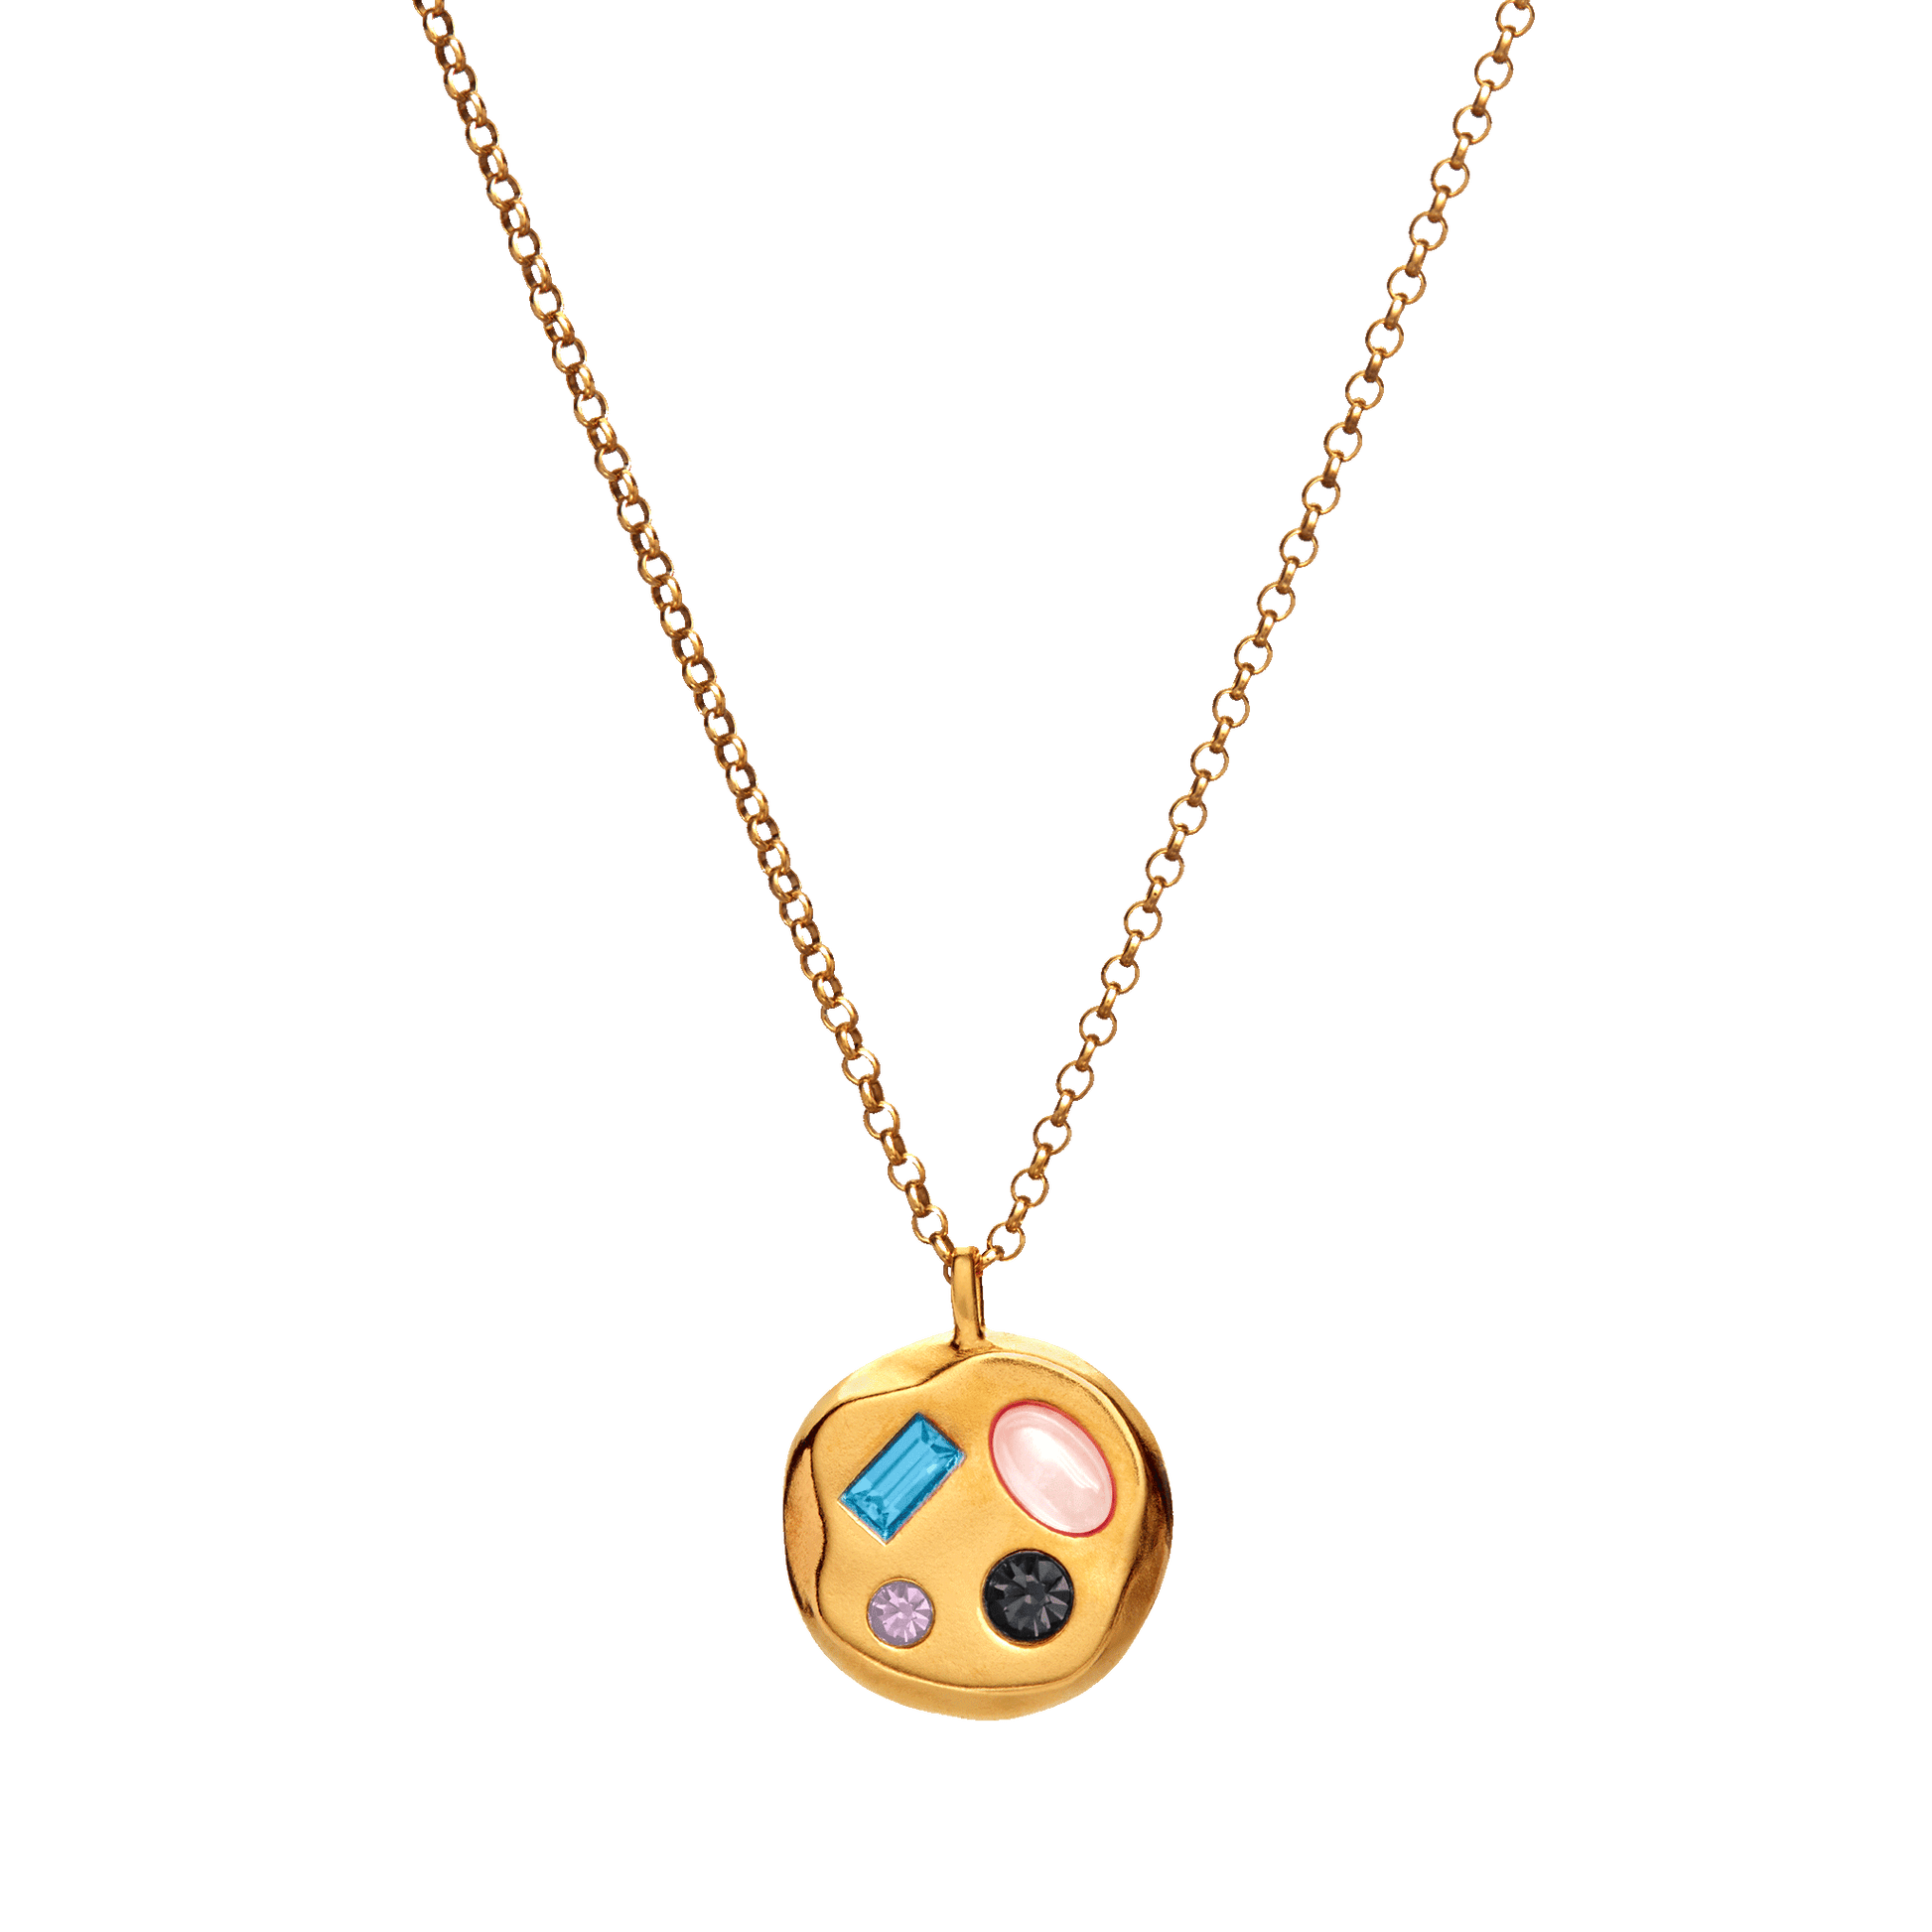 The December First Pendant